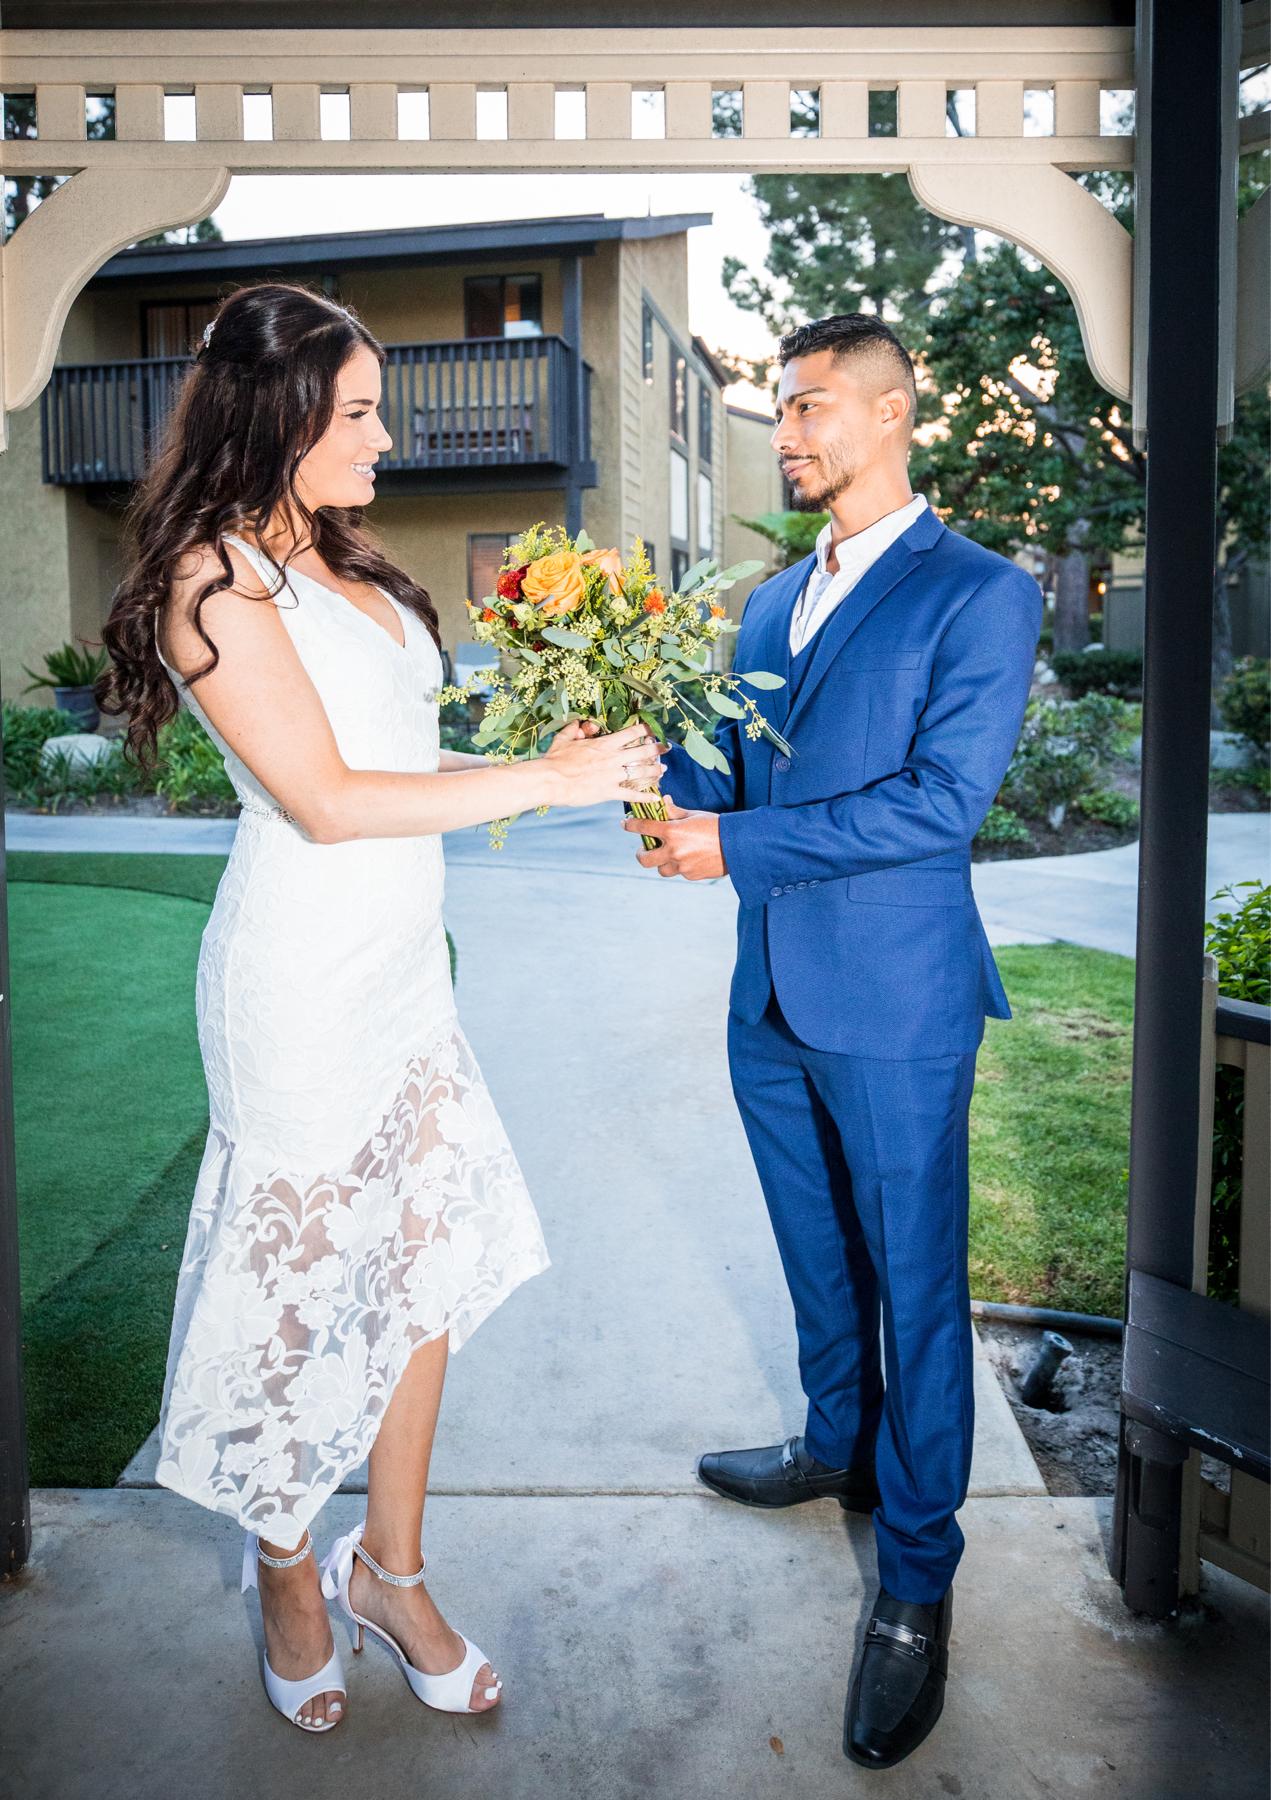 The day we officially tied the knot at our home in Costa Mesa!